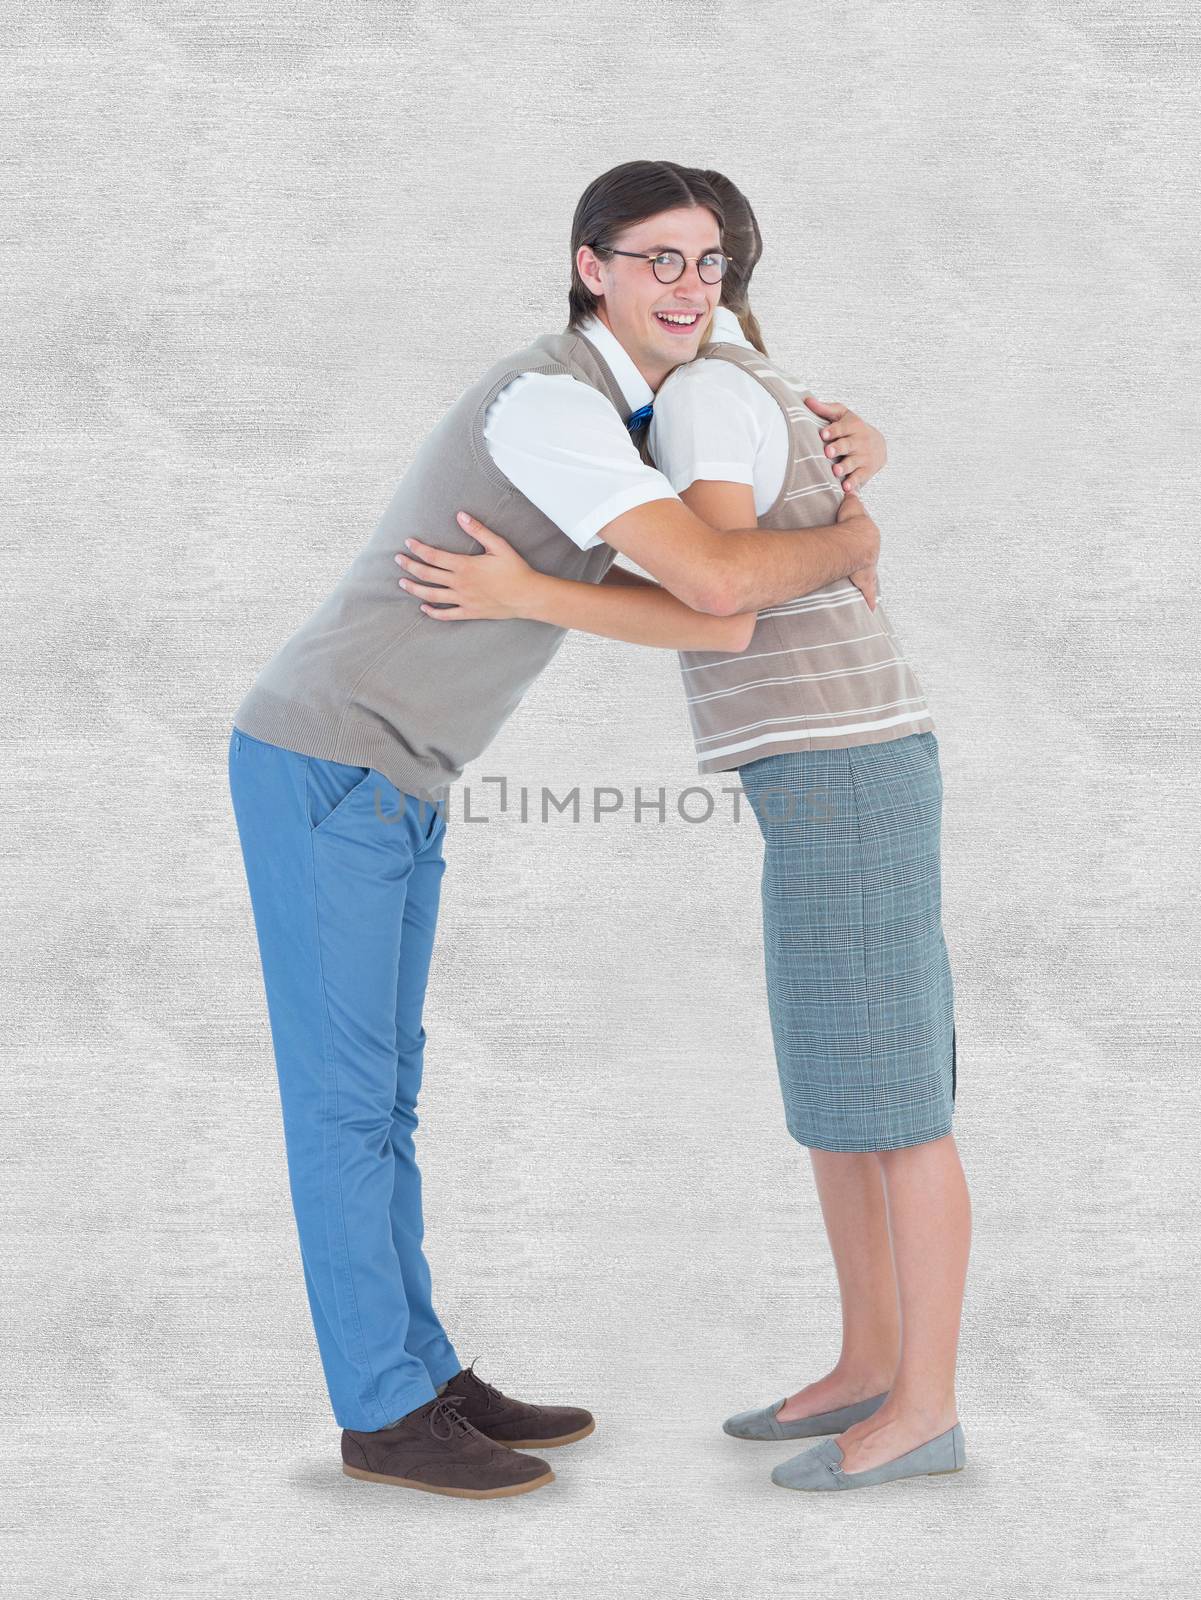 Geeky hipster couple hugging  against white background